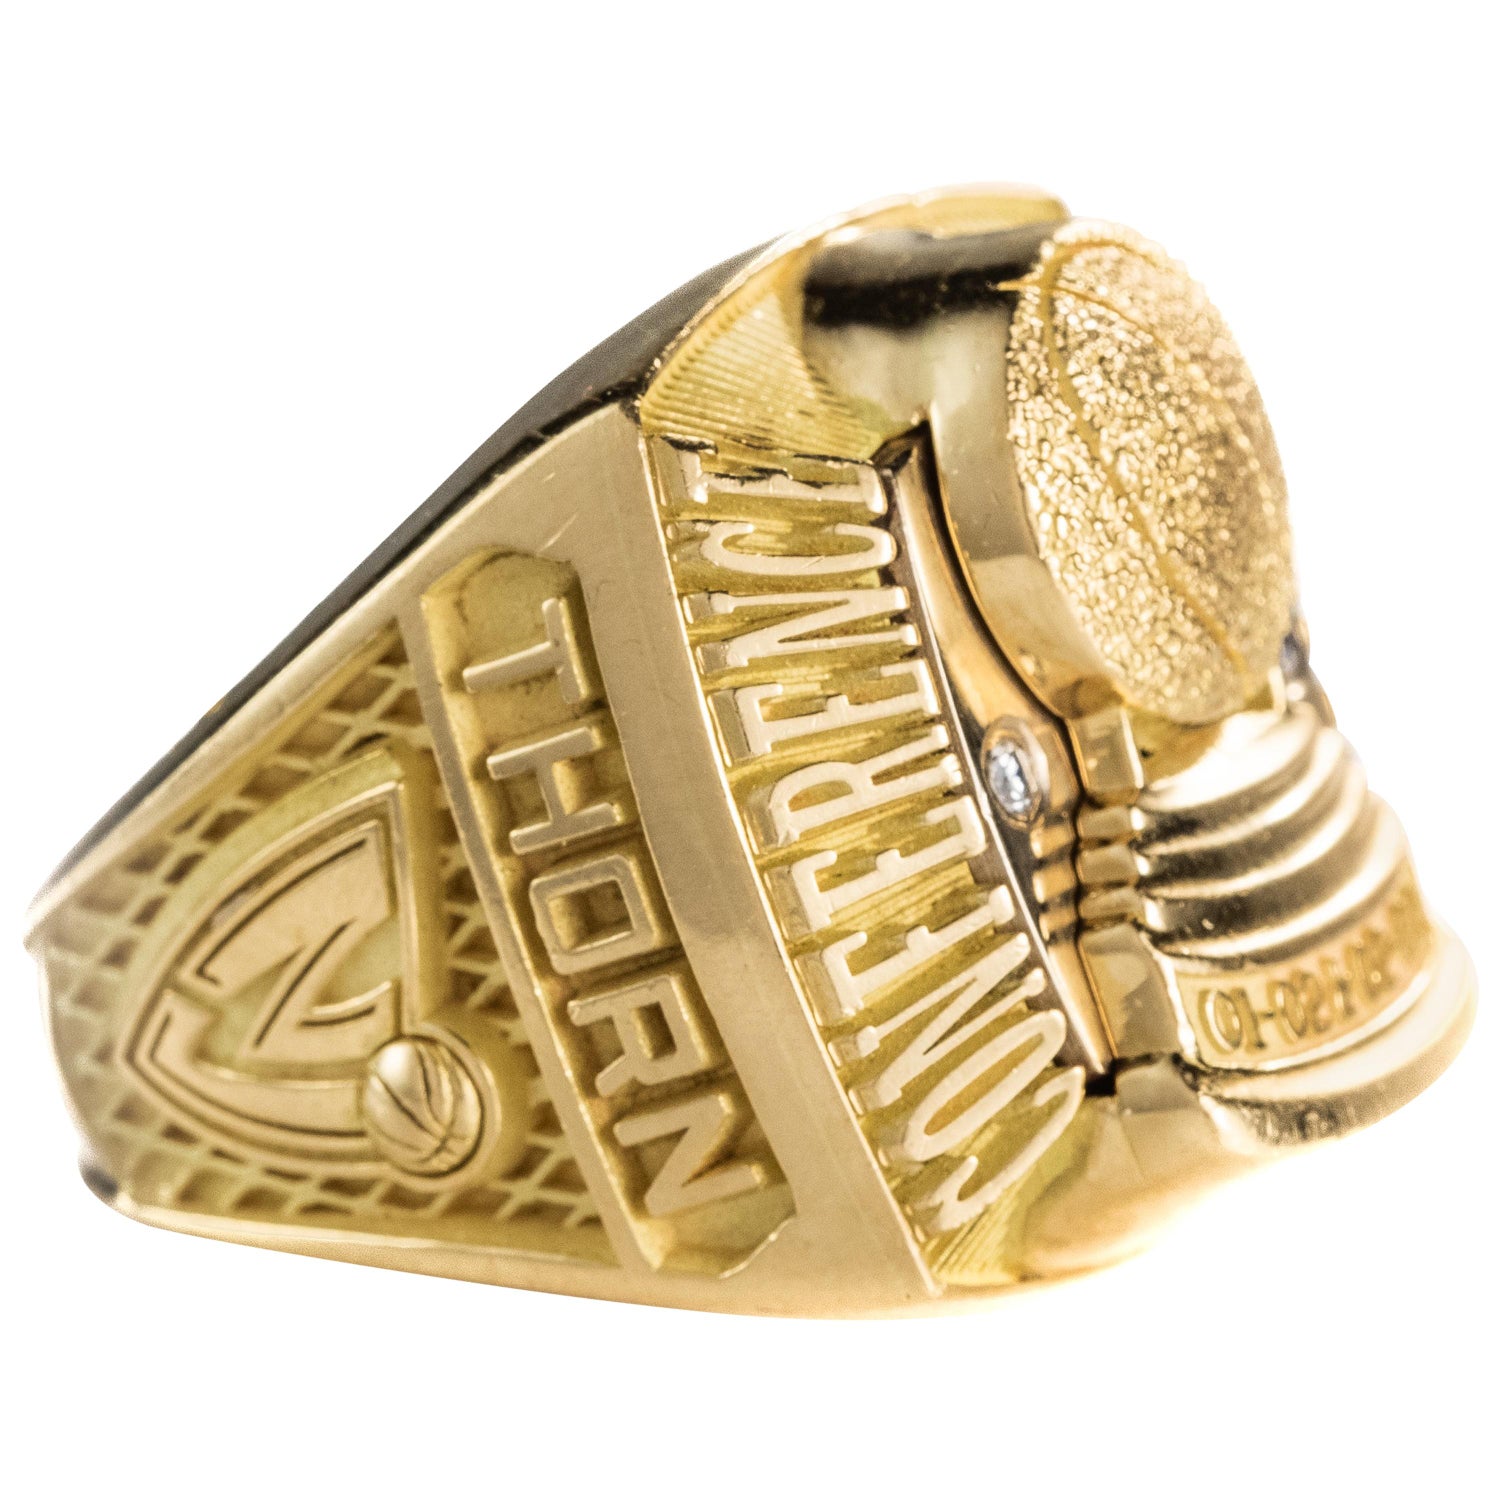 Championship Rings - Buy and Sell Championship Rings